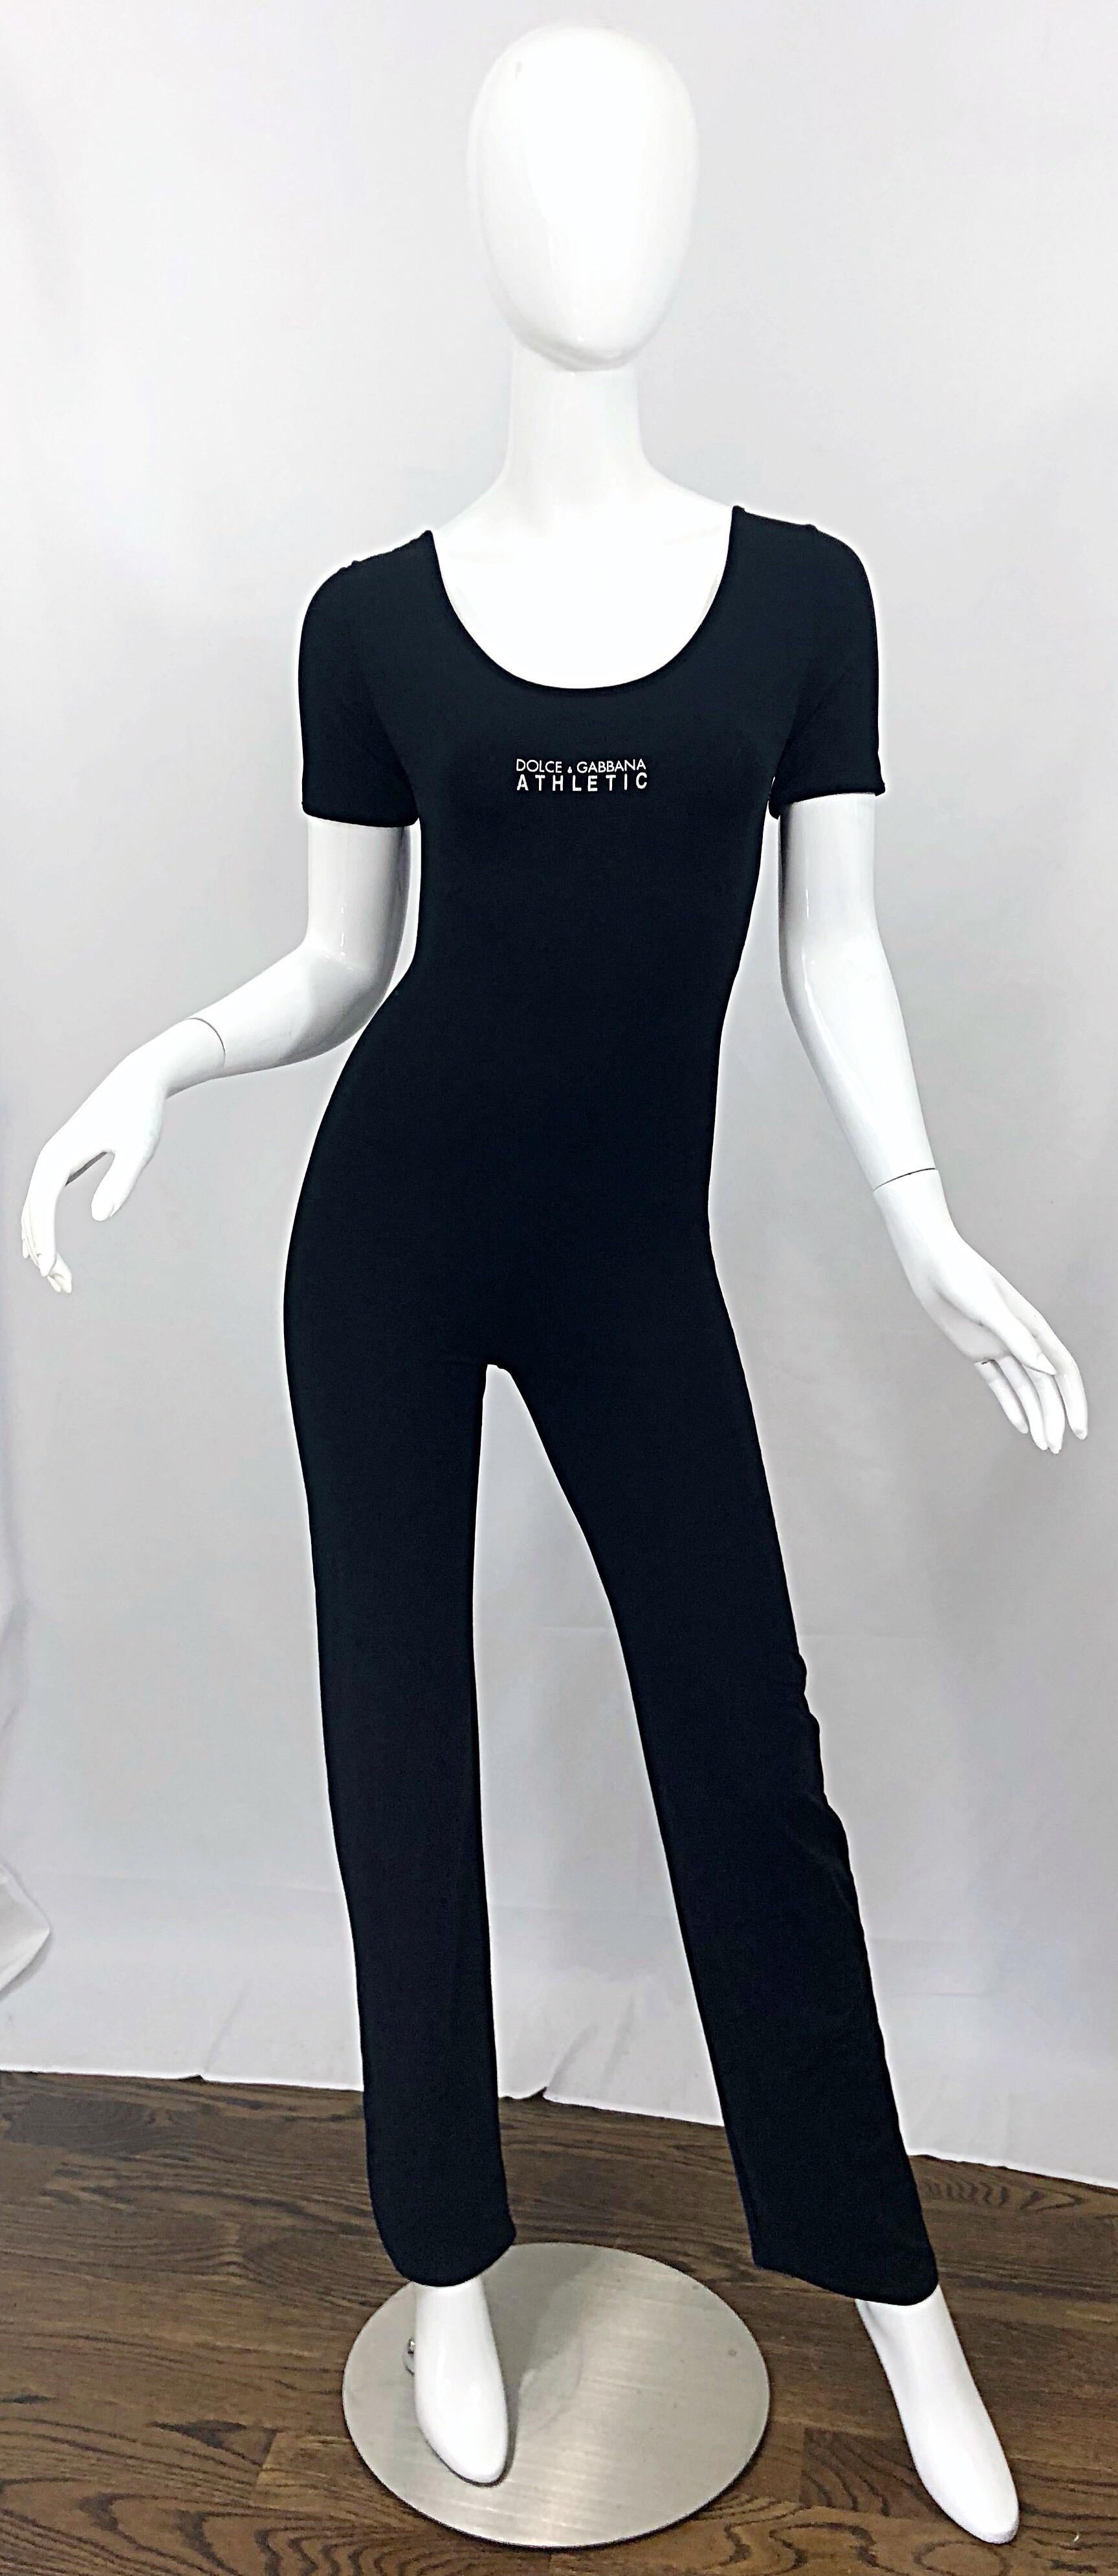 Awesome never worn late 1990s DOLCE & GABBANA logo black and white 'Athletic' short sleeve jumpsuit! Fitted bodice with slim legs and a slight bootcut fit. Super soft lightweight stretchy fabric make this perfect for the gym or a night out (75%